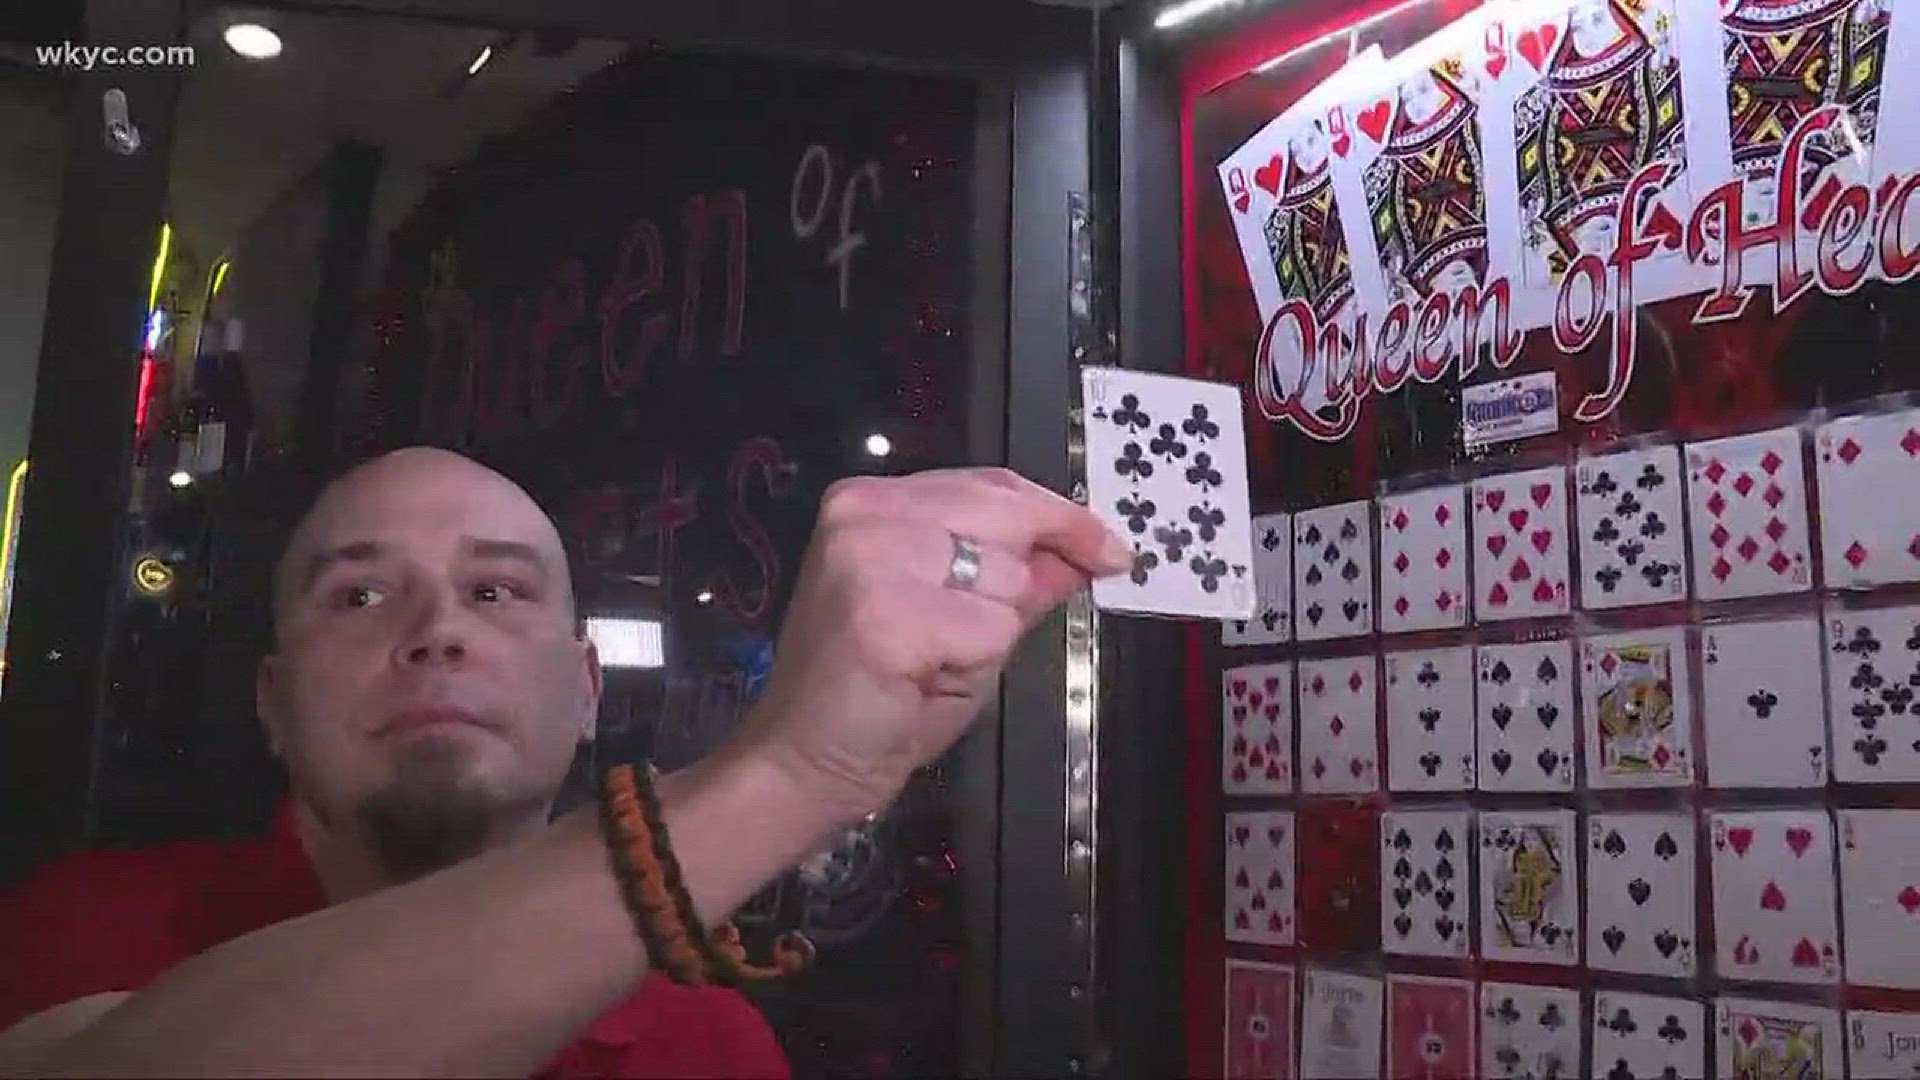 No winner picked in 3.2 million Queen of Hearts drawing at Grayton